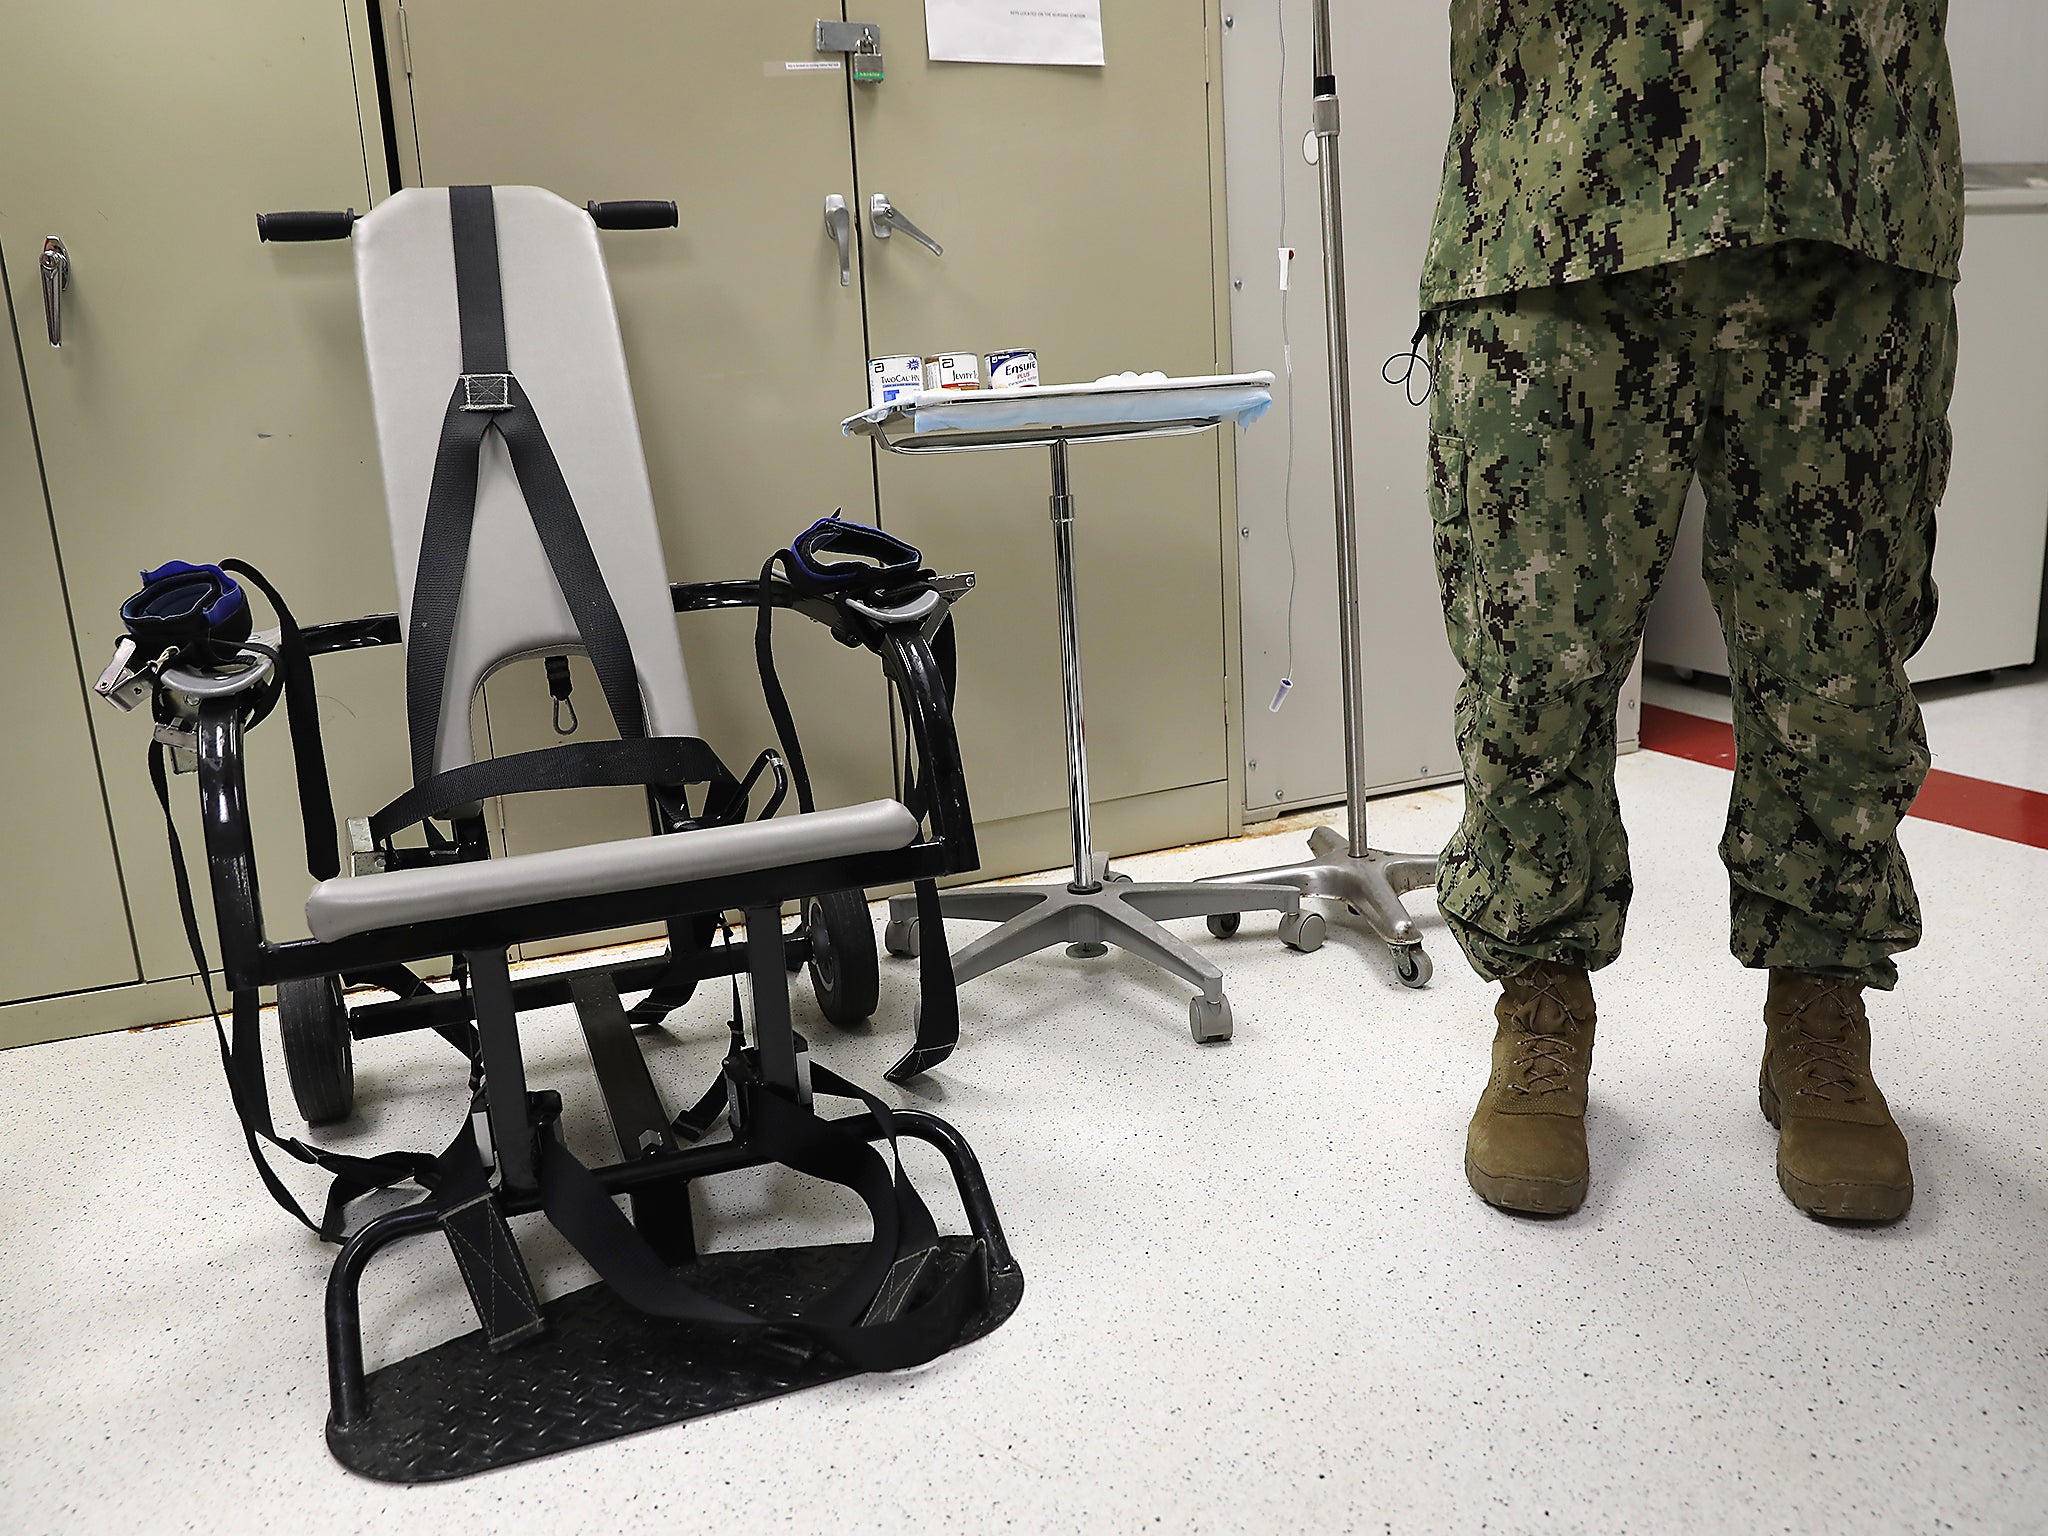 A US Navy doctor displays a restraint chair in the detainee clinic in the ‘Gitmo’ maximum security detention center at the US Naval Station at Guantanamo Bay, Cuba